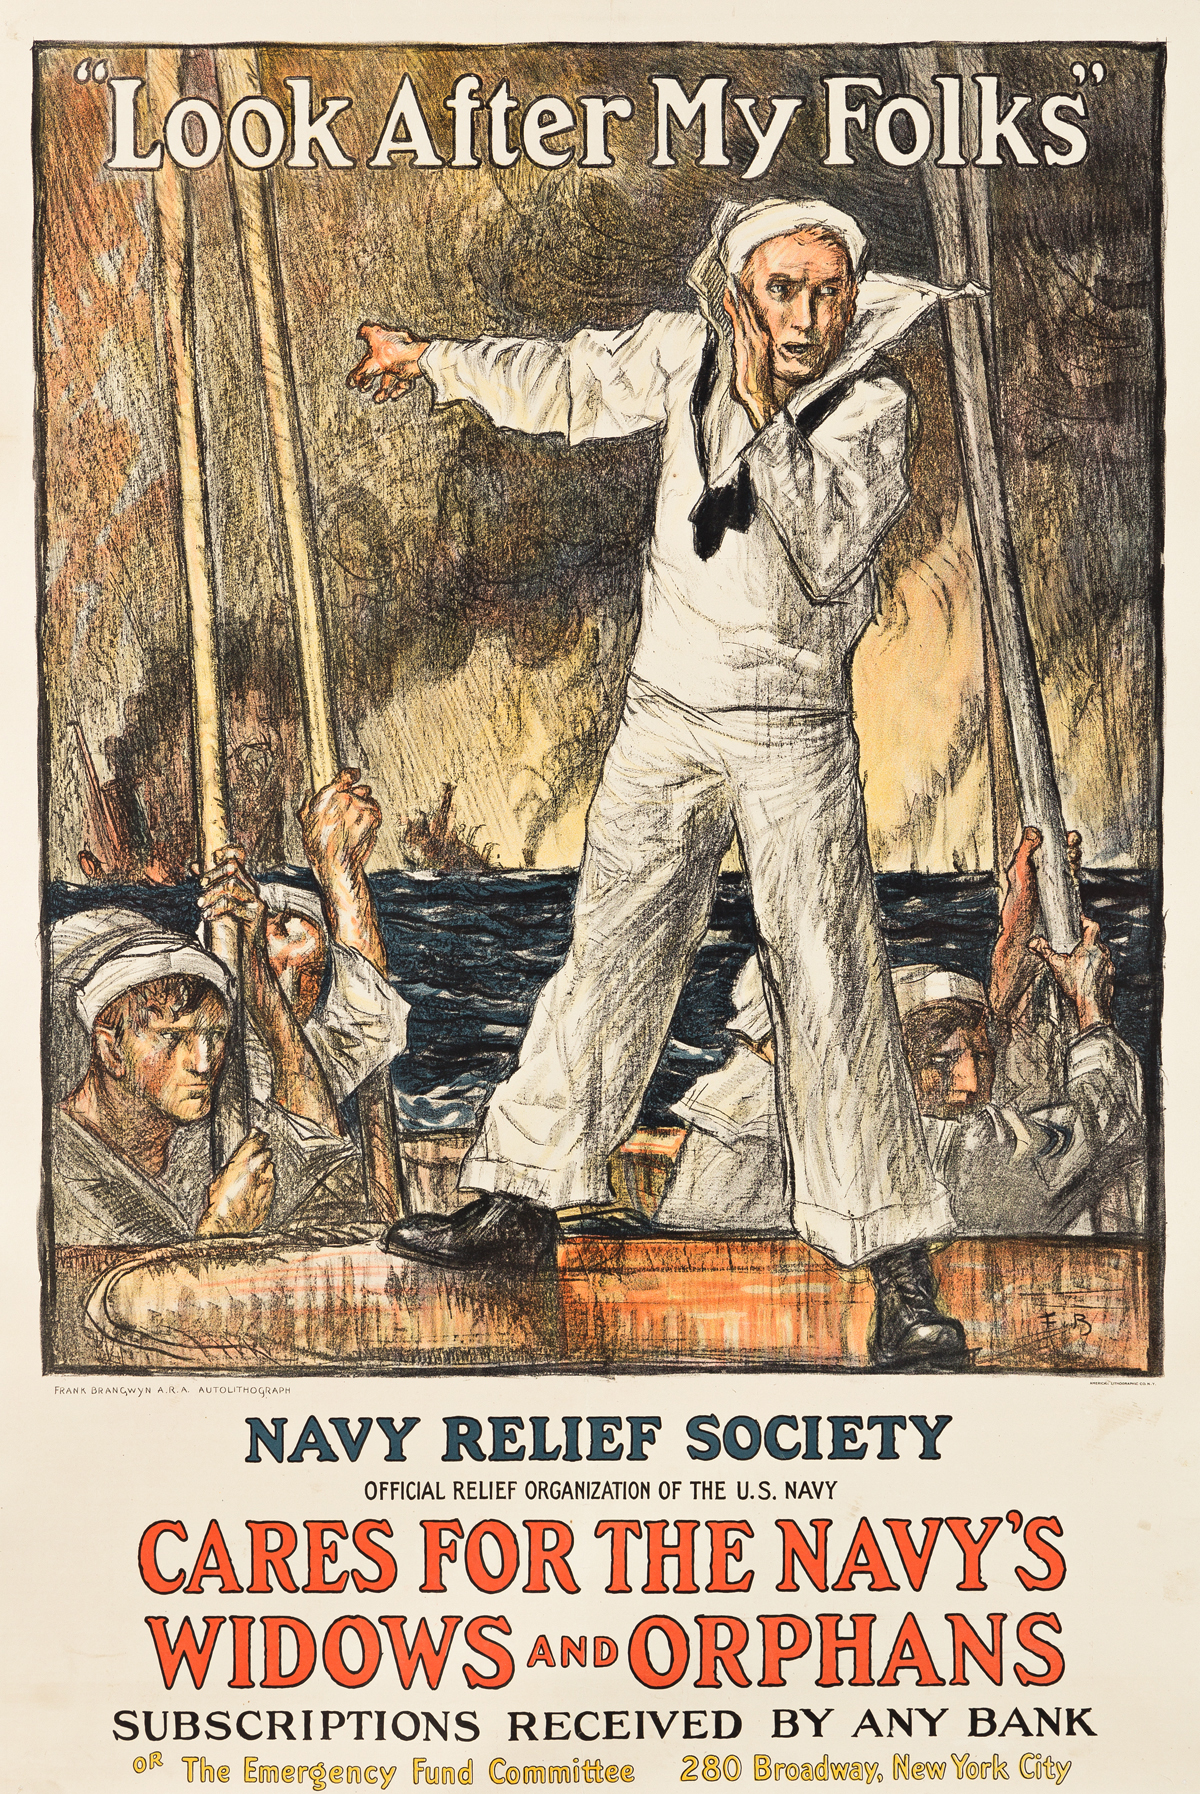 FRANK BRANGWYN (1867-1956).  LOOK AFTER MY FOLKS / NAVY RELIEF SOCIETY. Circa 1917. 41x27½ inches, 104x69¾ cm. American Lithographic